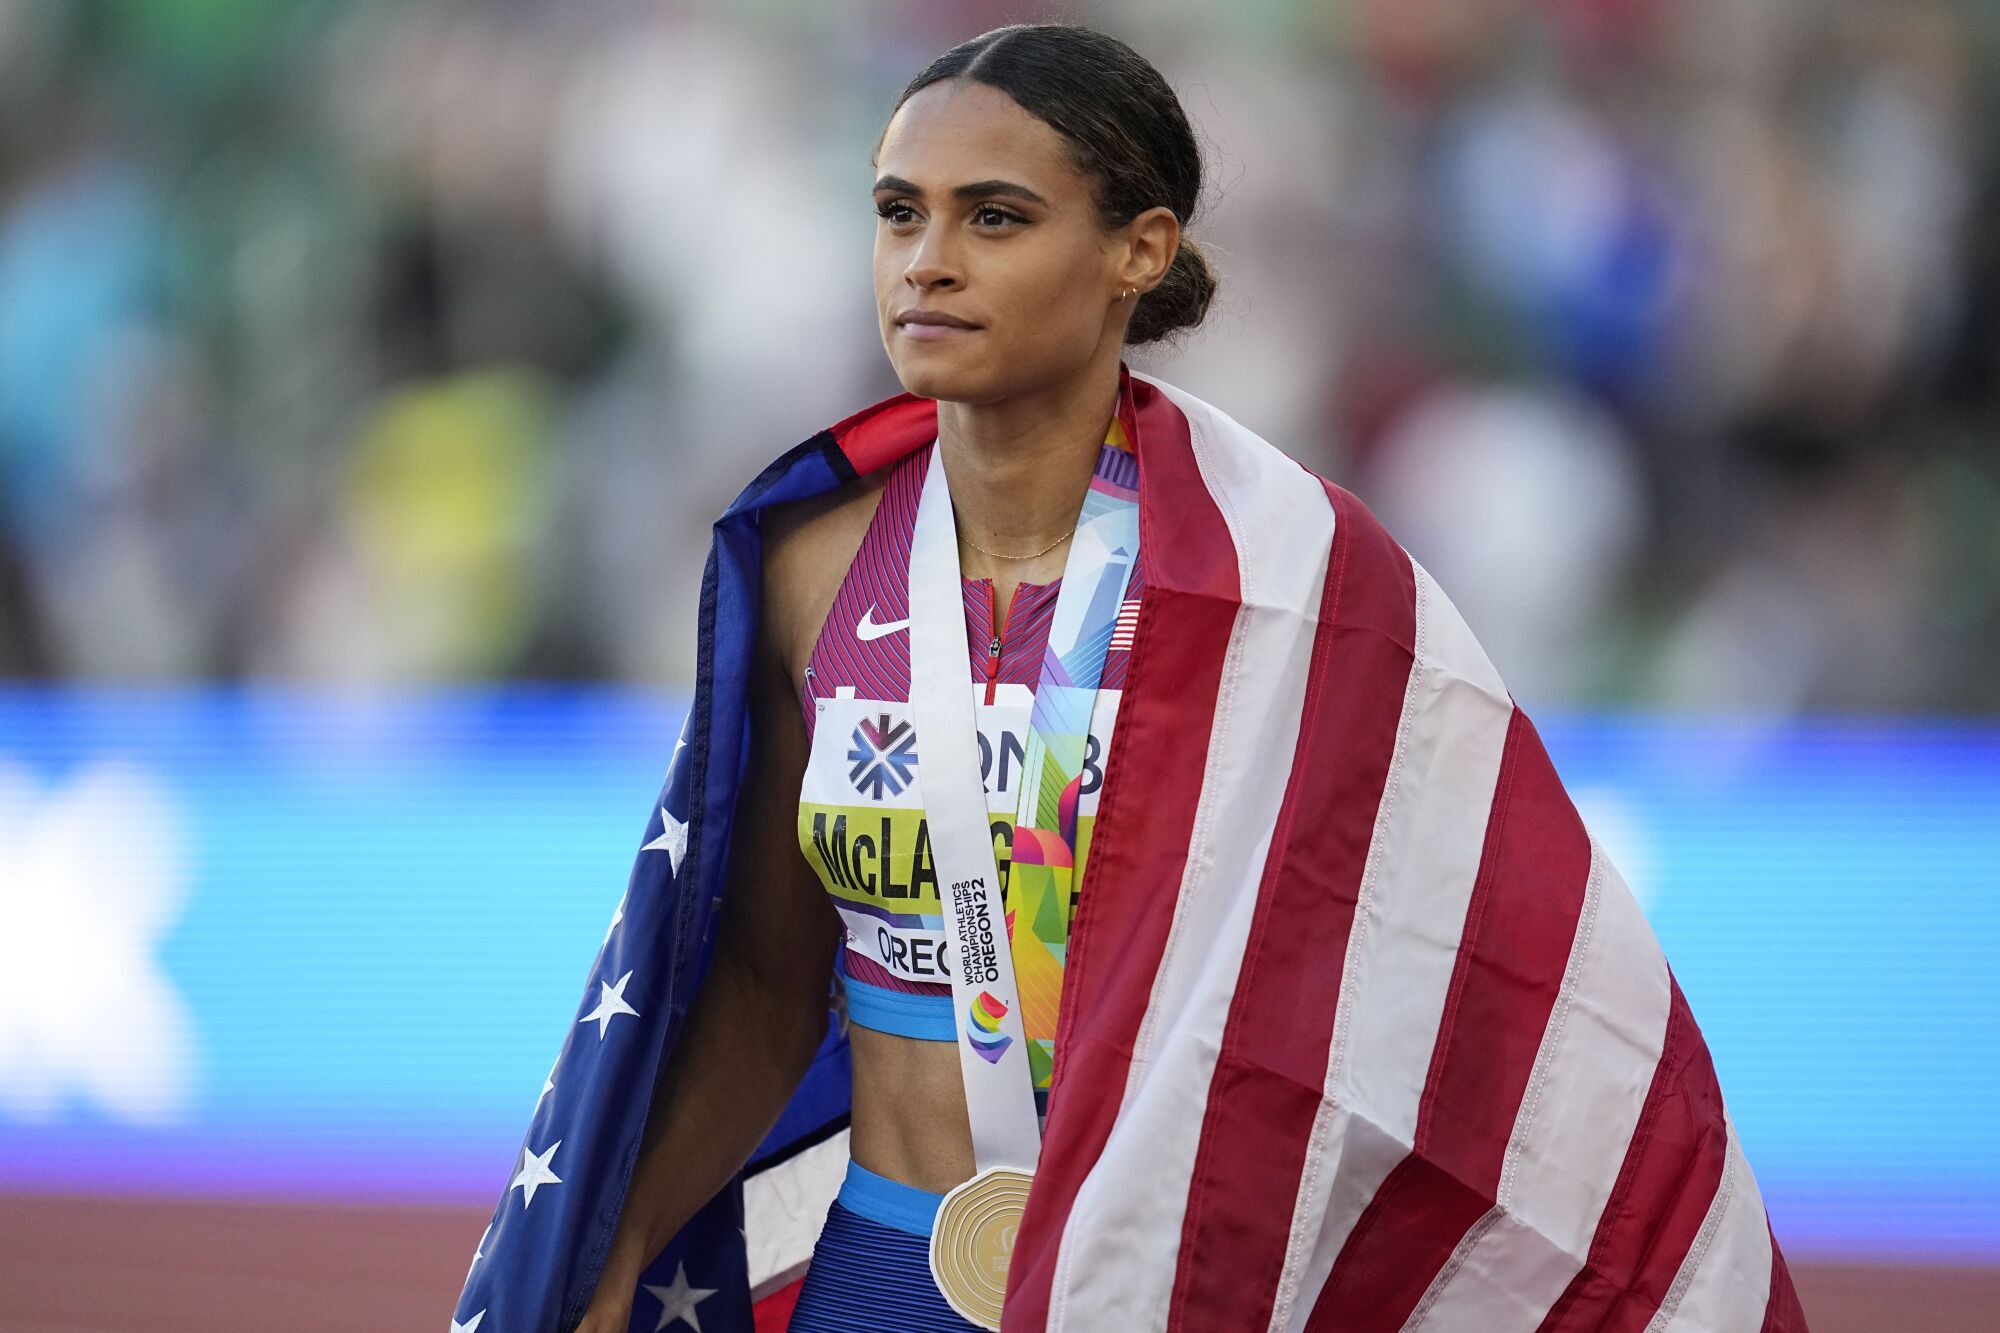 Sydney McLaughlin-Levrone celebrates after winning gold in the women's 400-meter hurdles at the world championships.